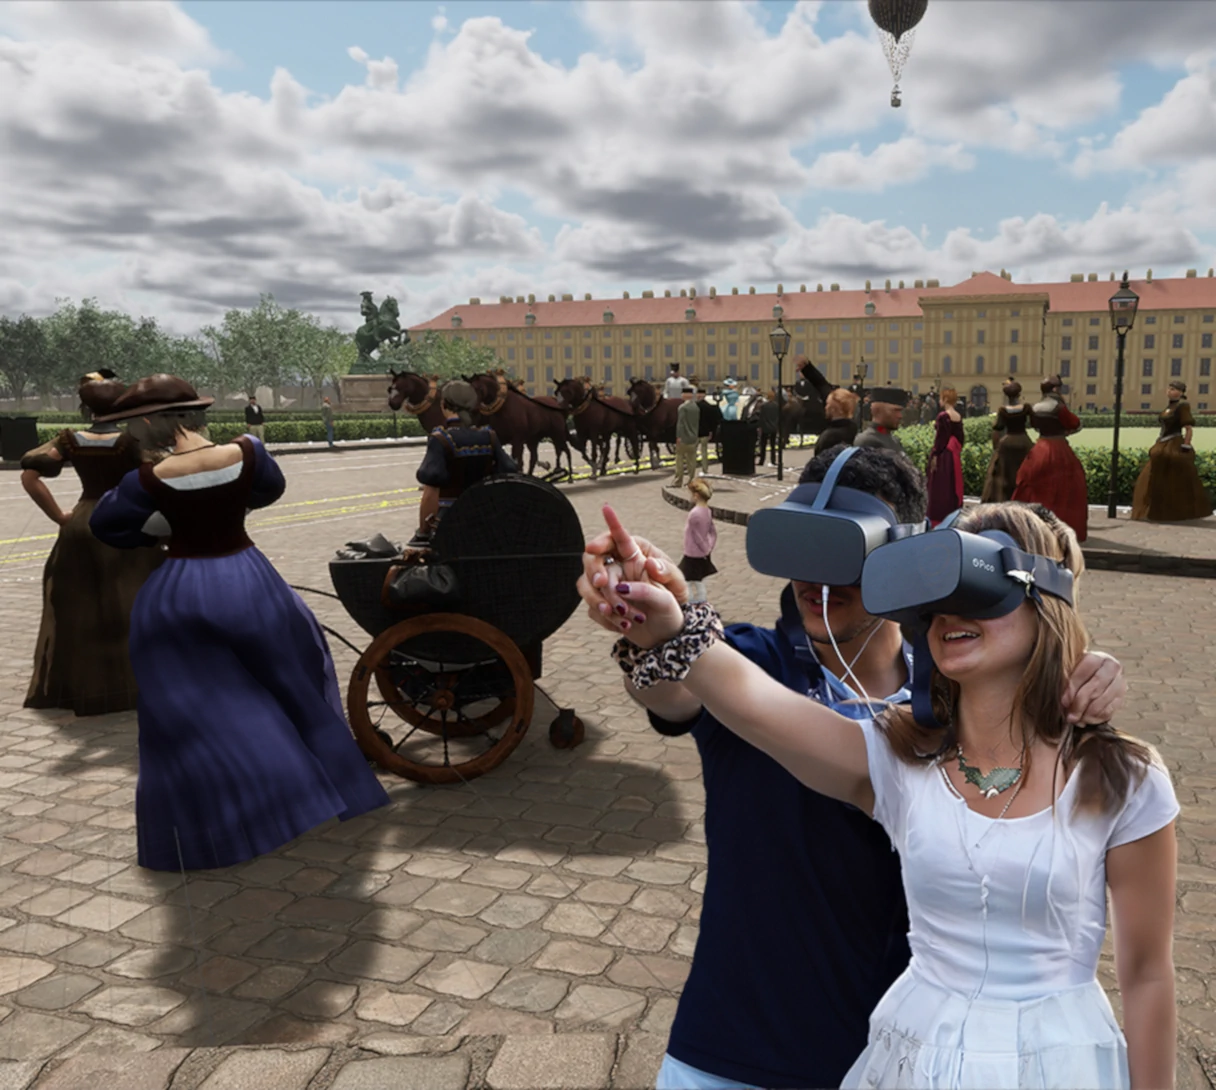 A young woman and a young man wearing VR glasses are in a large square with horse-drawn carriages and people in a virtual historical world